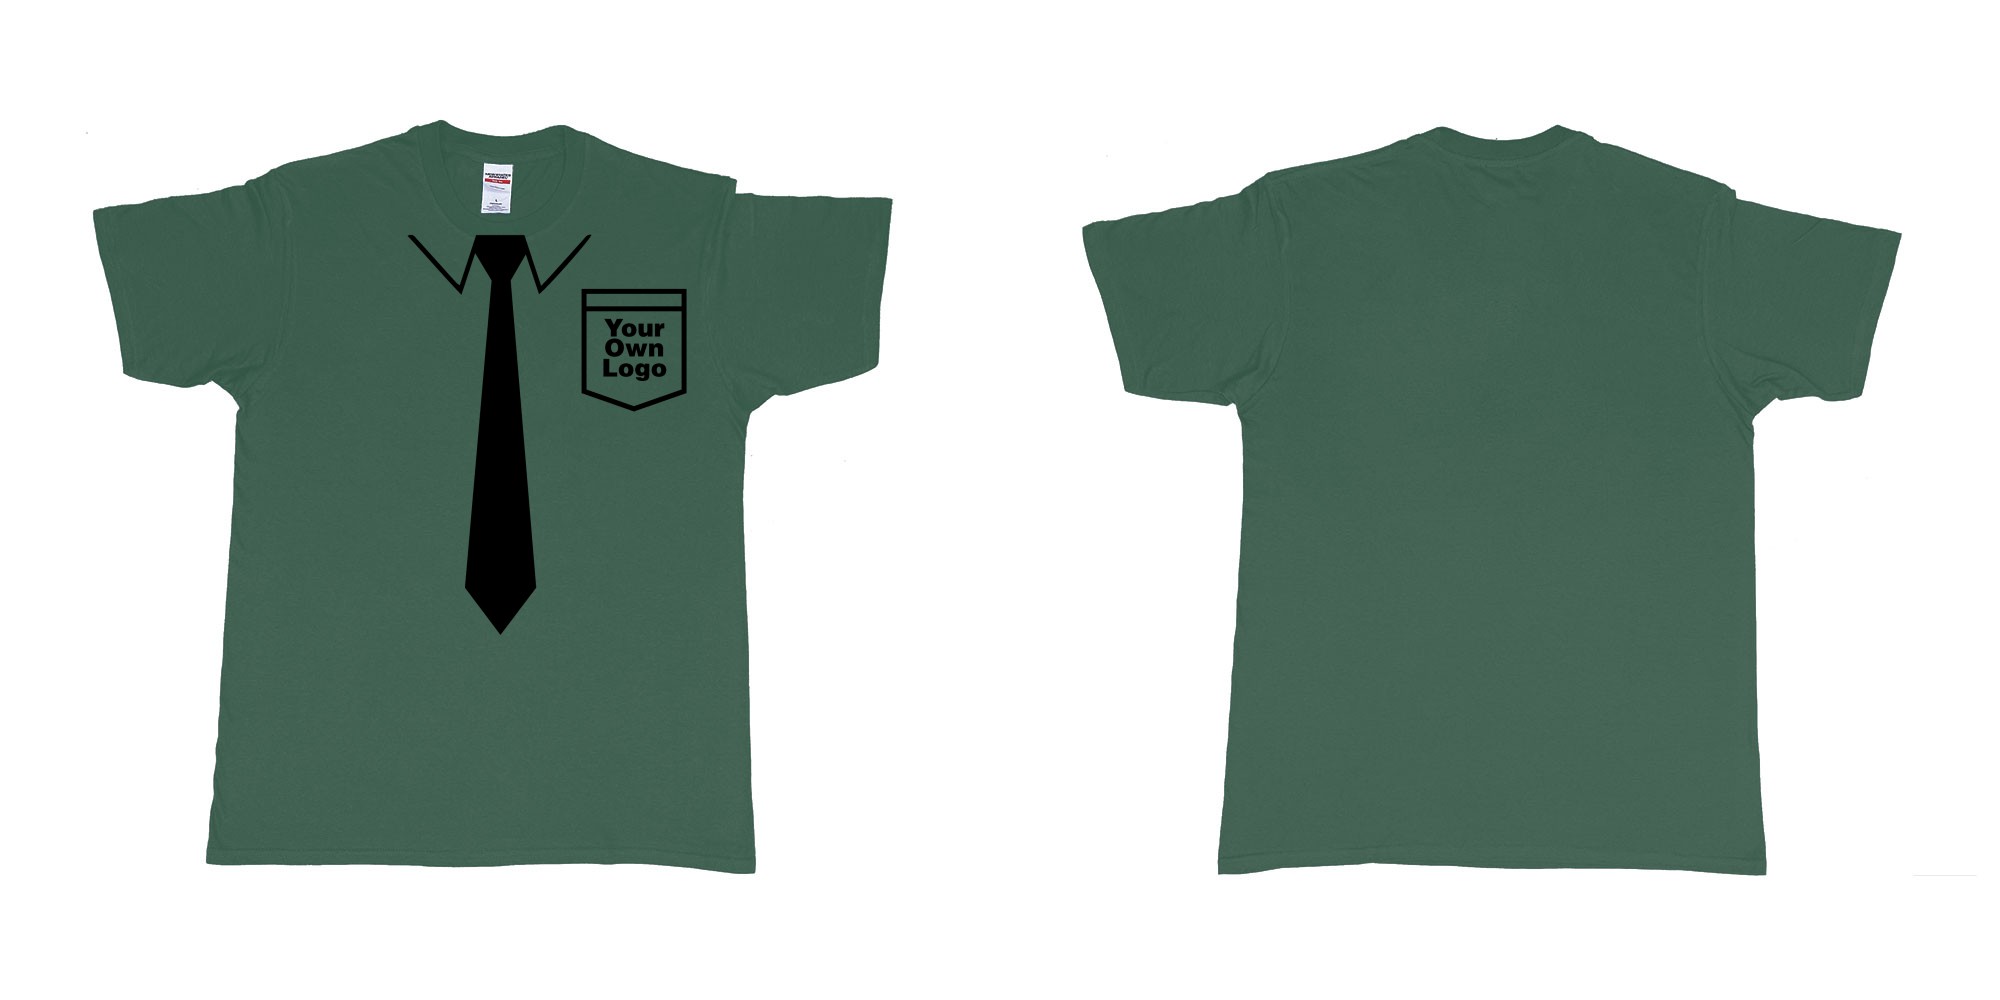 Custom tshirt design staff uniform with tie pocket own logo bali in fabric color forest-green choice your own text made in Bali by The Pirate Way